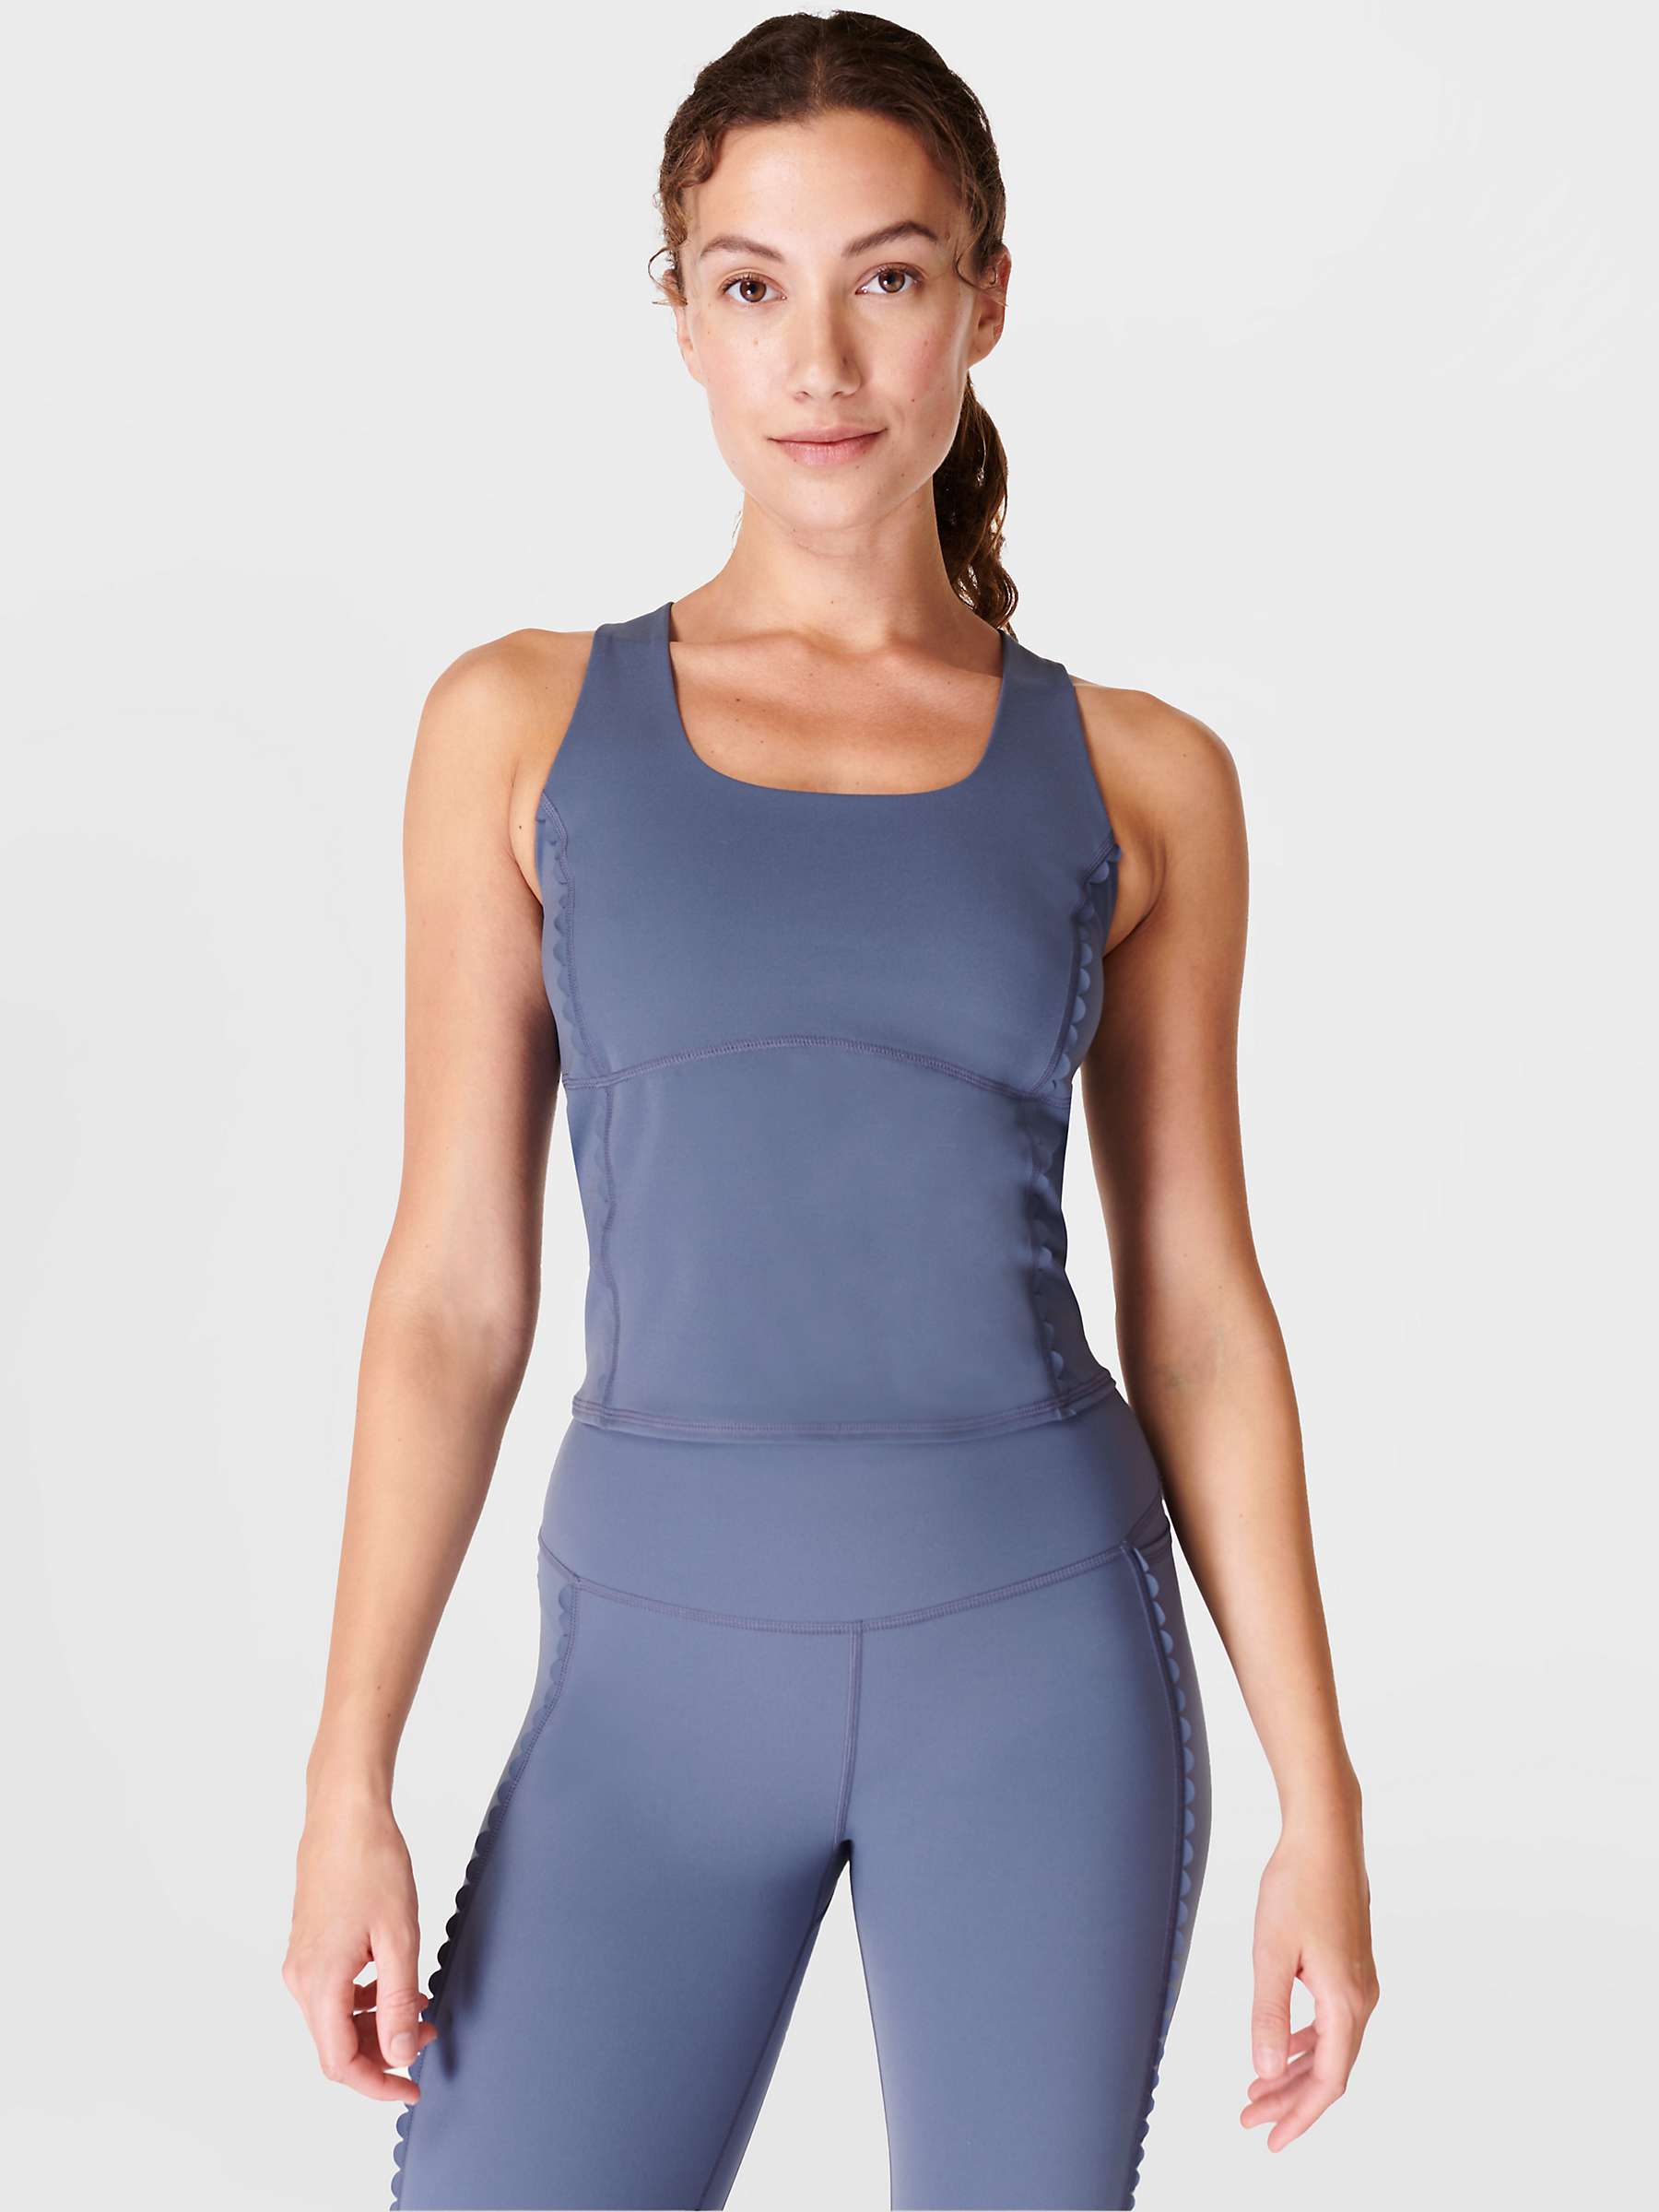 Buy Sweaty Betty Power Scallop Top Online at johnlewis.com